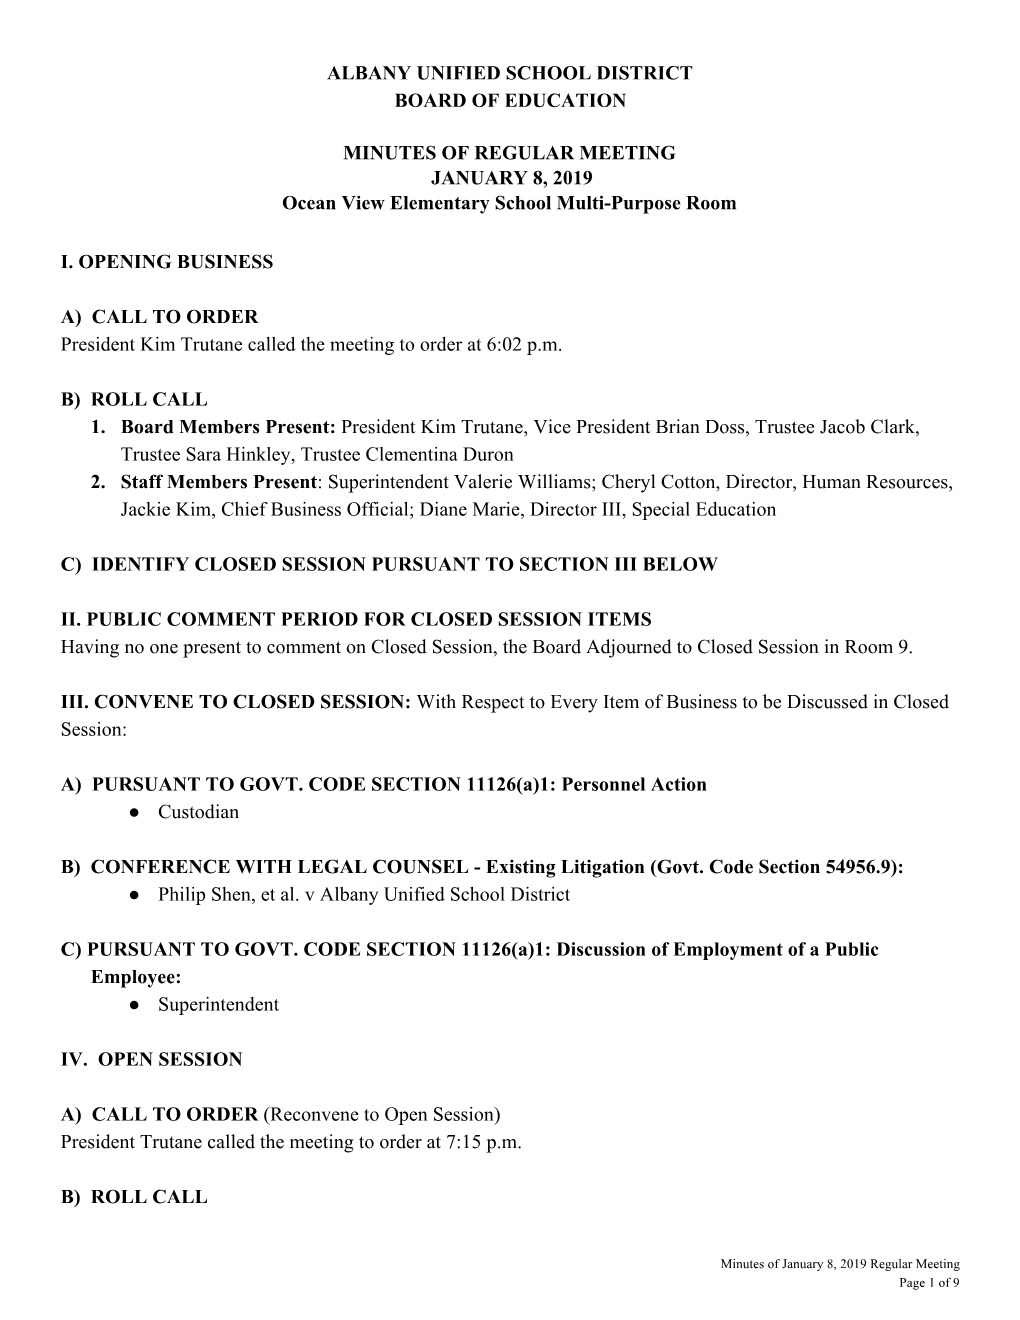 ALBANY UNIFIED SCHOOL DISTRICT BOARD of EDUCATION MINUTES of REGULAR MEETING JANUARY 8, 2019 Ocean View Elementary School Multi